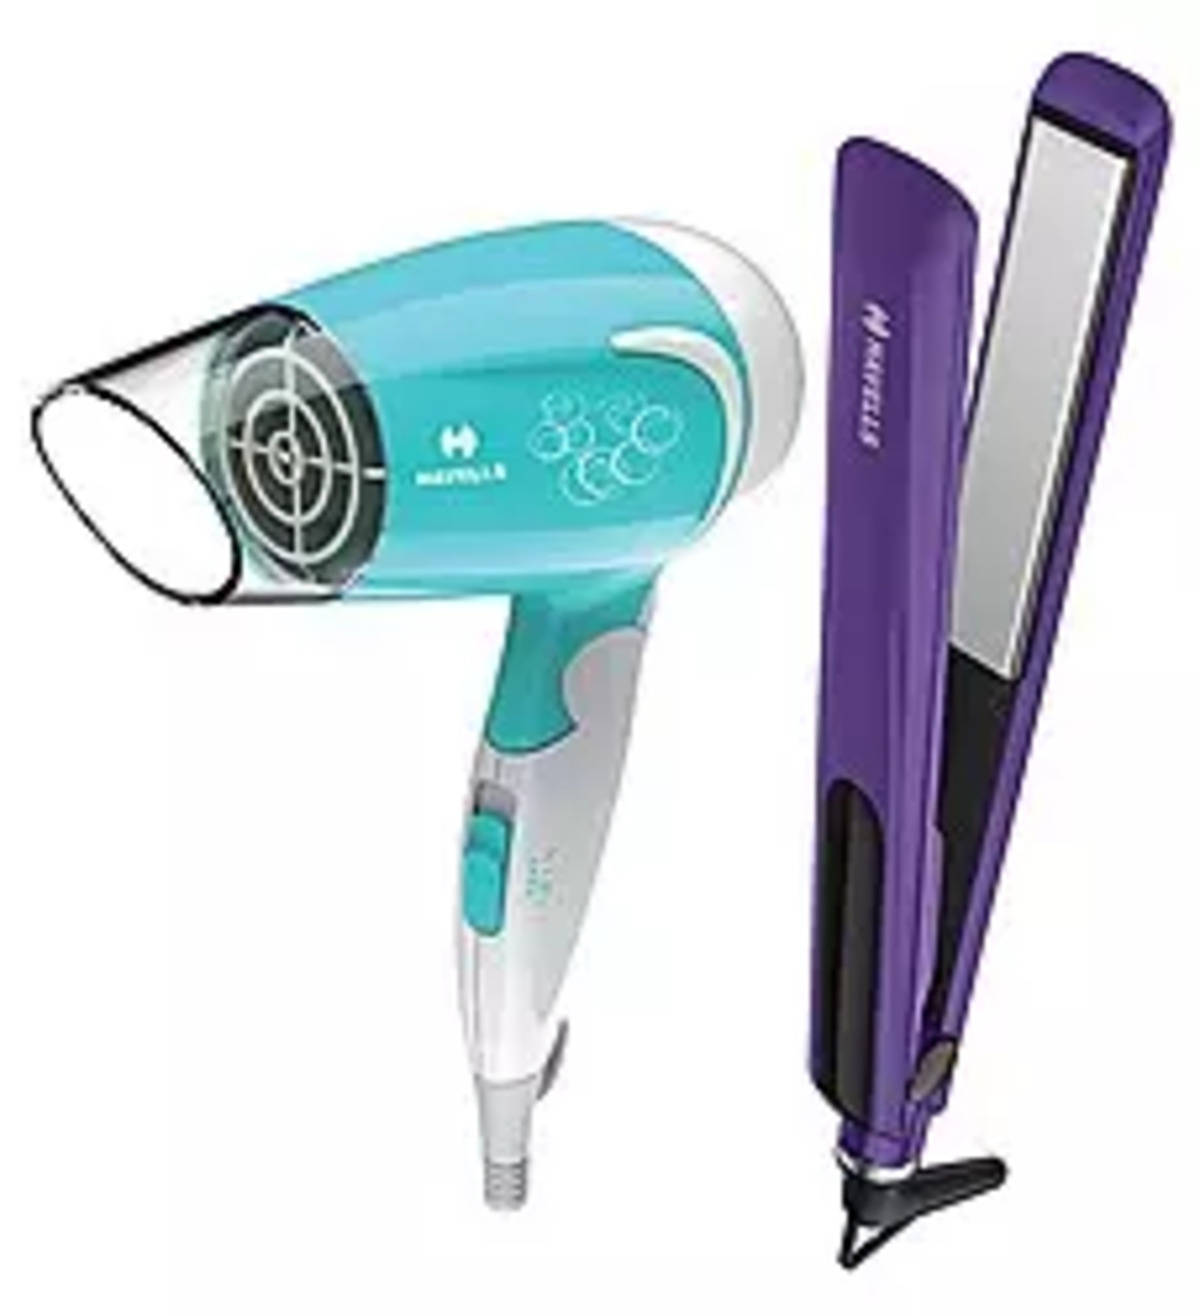 Havells hair styling combo - Straightener (Purple) and Hair dryer  (Turquoise) Price in India, Specifications and Review